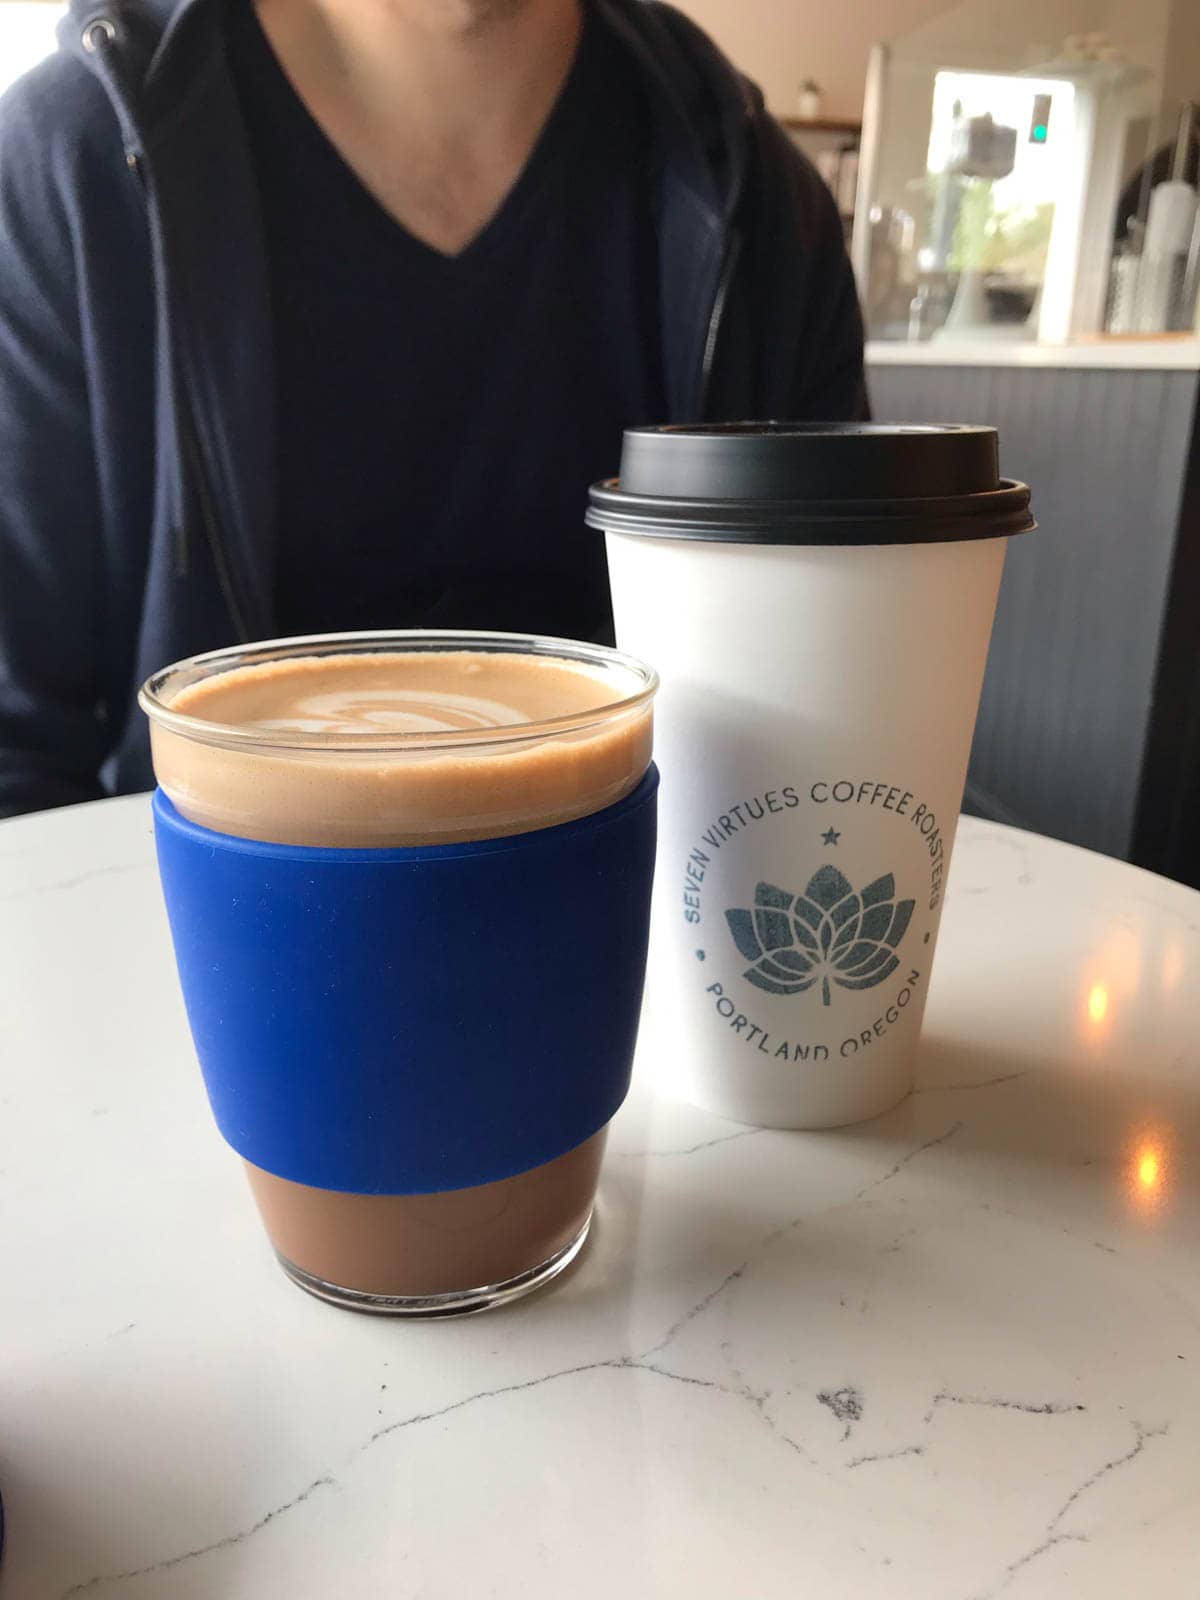 A glass coffee cup with a blue rubber grip, filled with coffee, alongside a paper cup reading “Seven Virtues Coffee”.